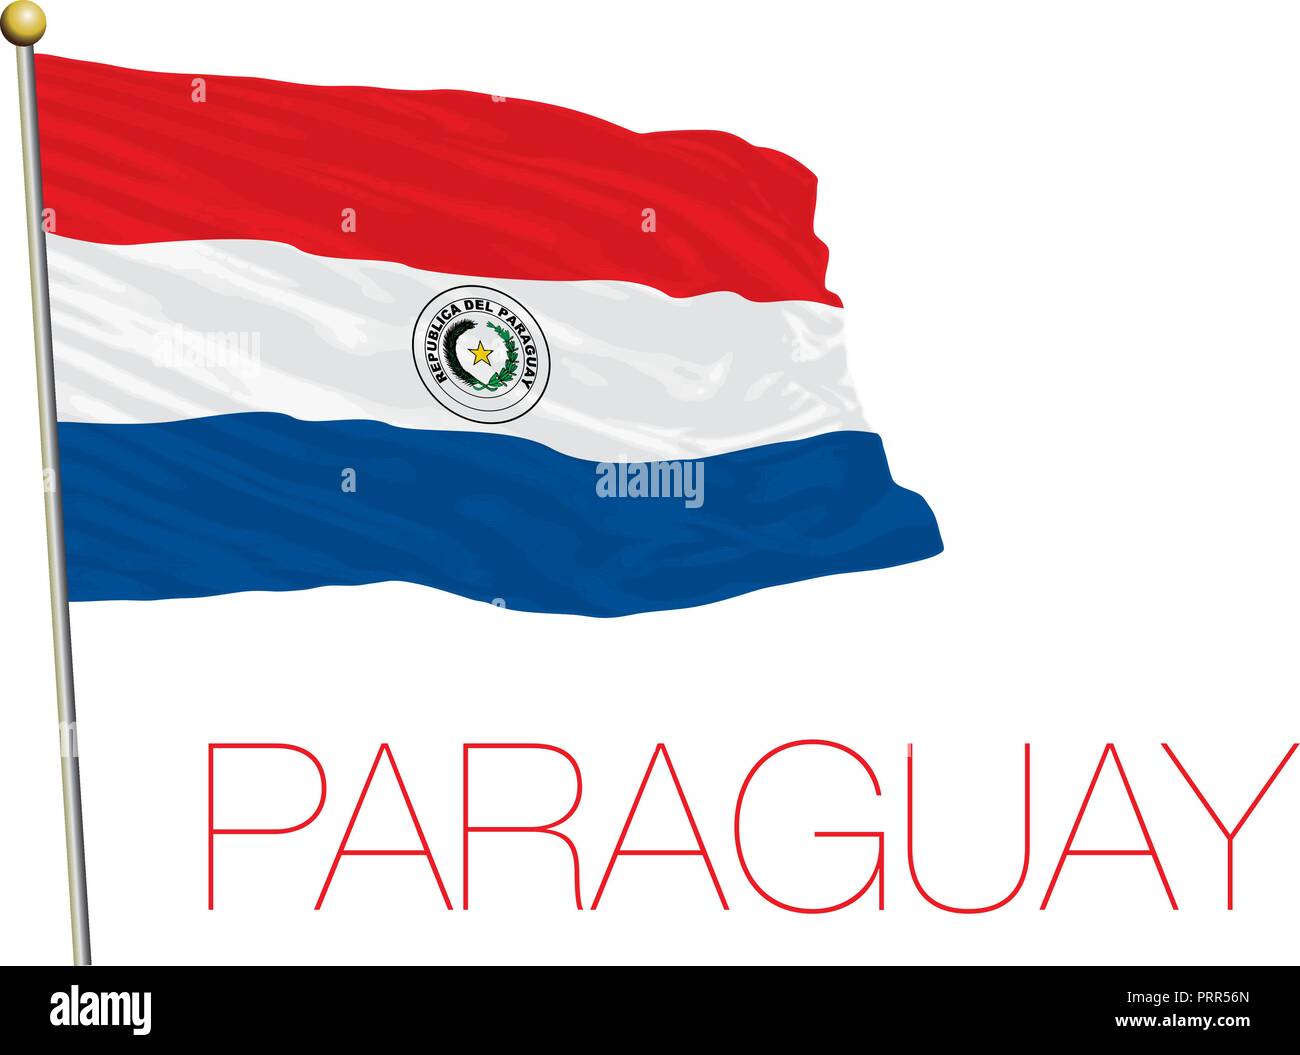 Paraguay official flag, vector illustration Stock Vector